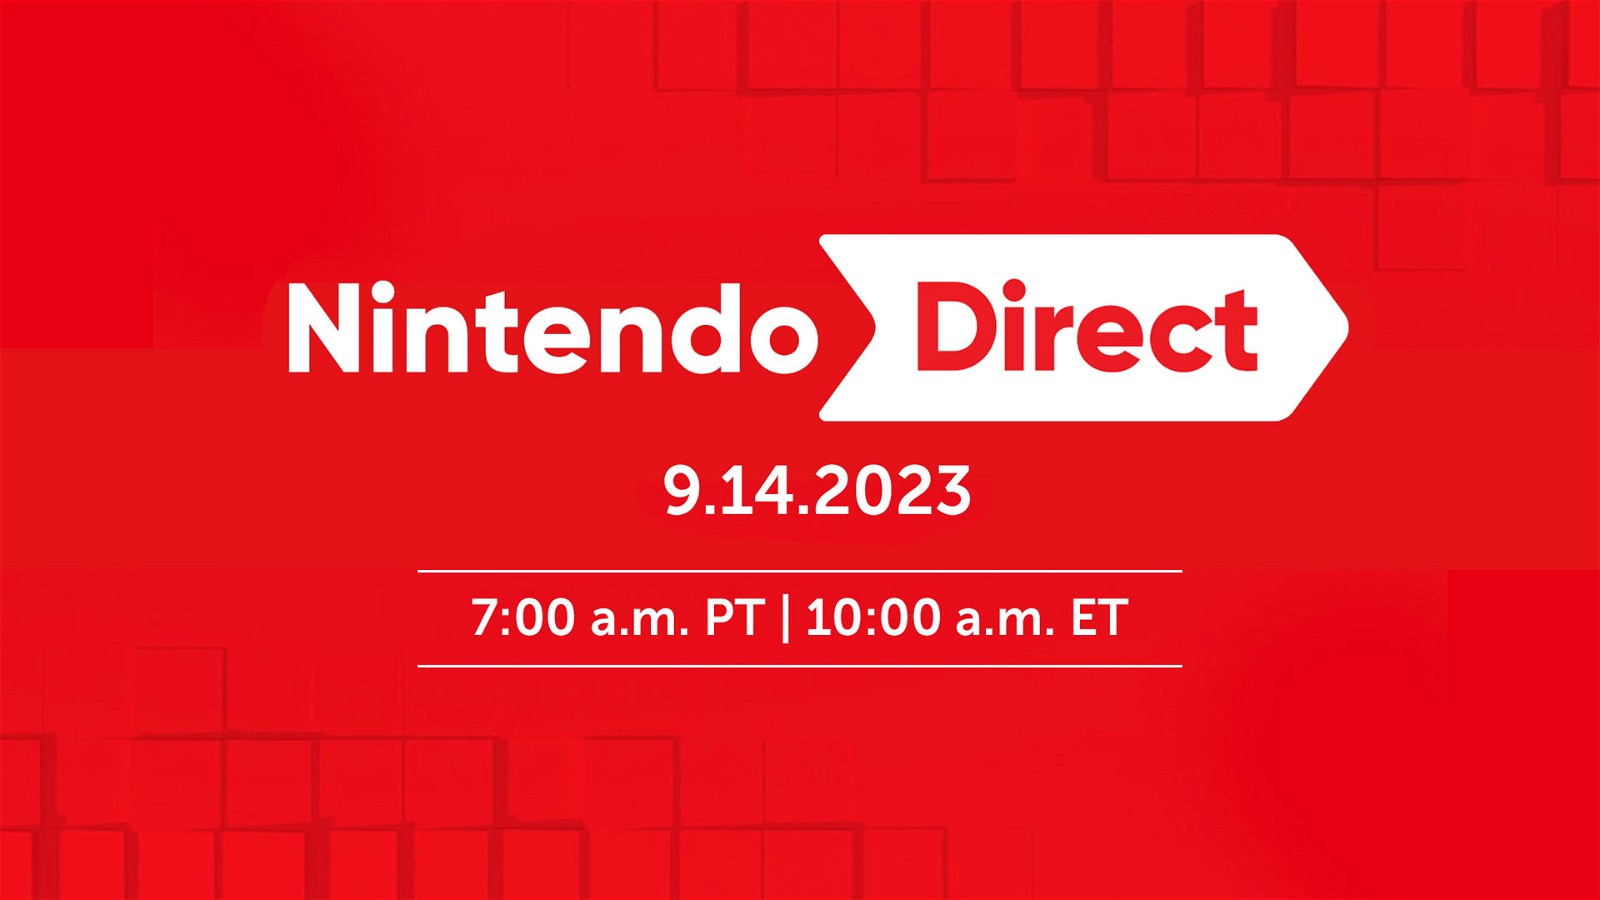 Nintendo Direct is all set to be broadcast live from 7 a.m. Pacific Time